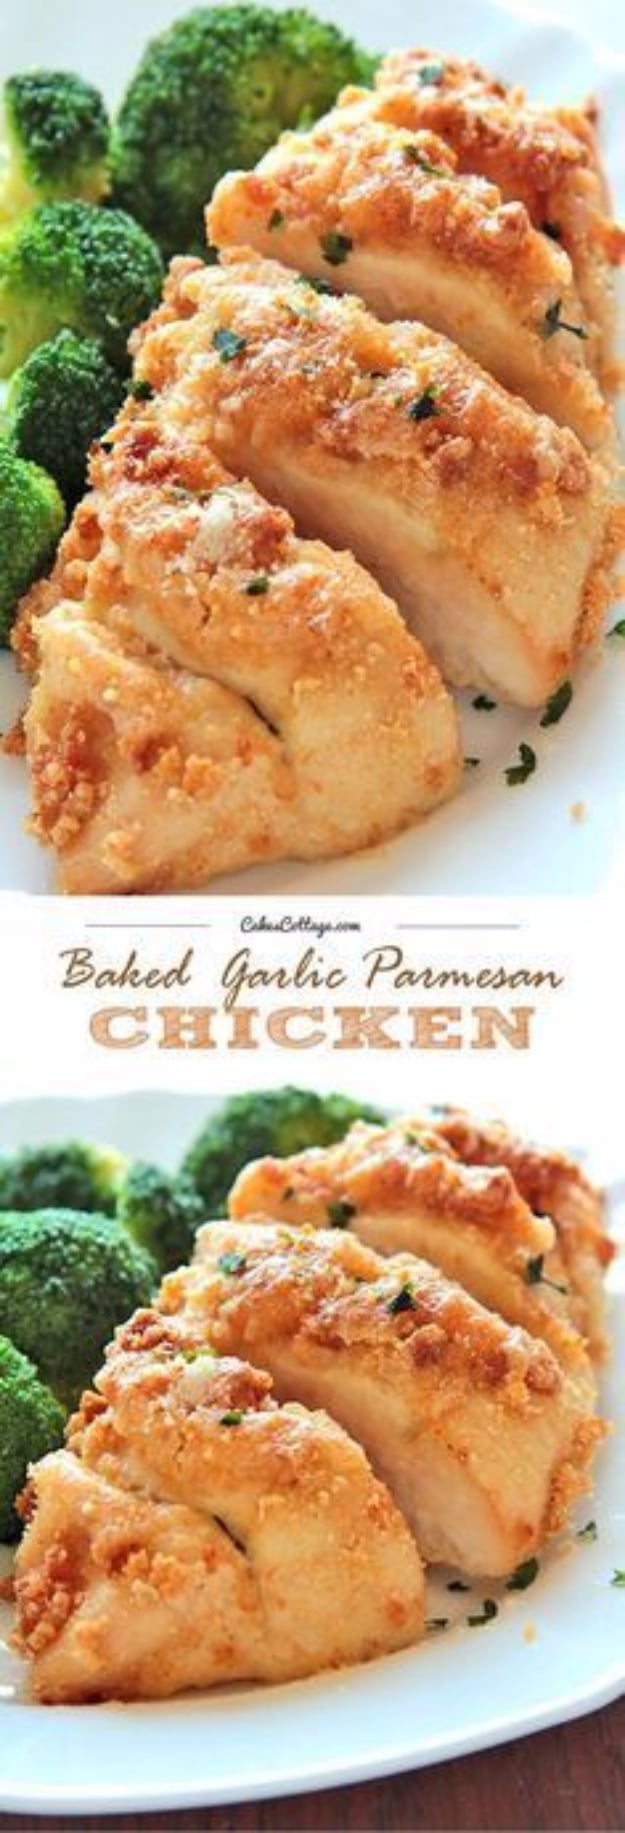 Quick and Healthy Dinner Recipes - Baked Garlic Parmesan Chicken - Easy and Fast Recipe Ideas for Dinners at Home - Chicken, Beef, Ground Meat, Pasta and Vegetarian Options - Cheap Dinner Ideas for Family, for Two , for Last Minute Cooking #recipes #healthyrecipes